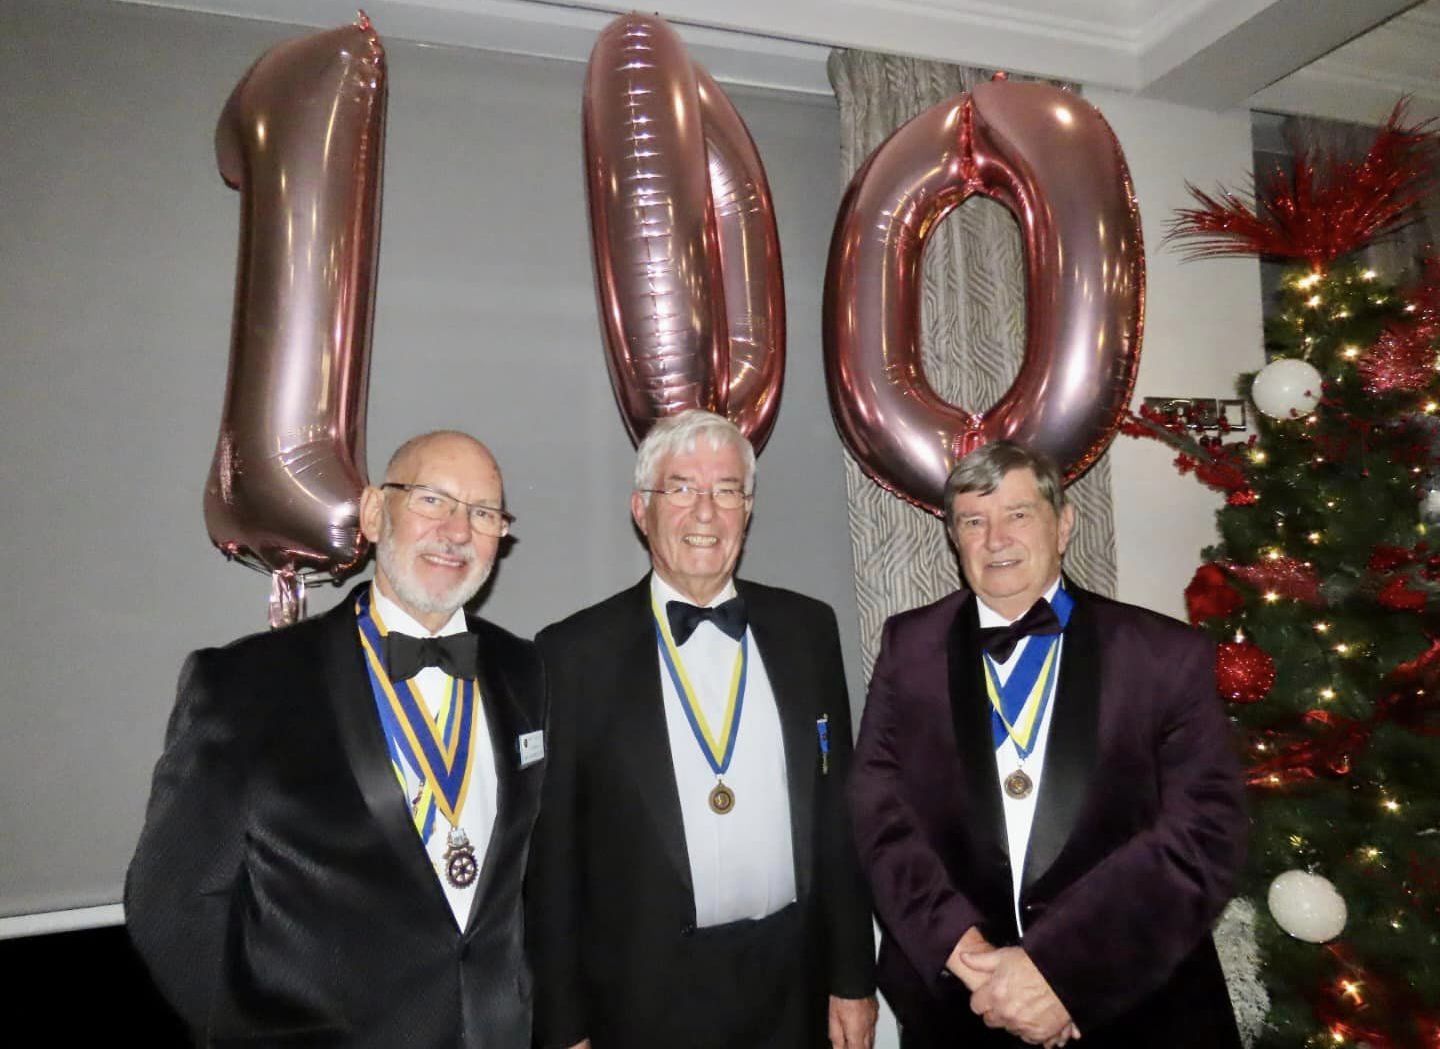 Guests enjoy the Rotary Club of Southport Centenary Charter Dinner. Photo by Andrew Brown Media